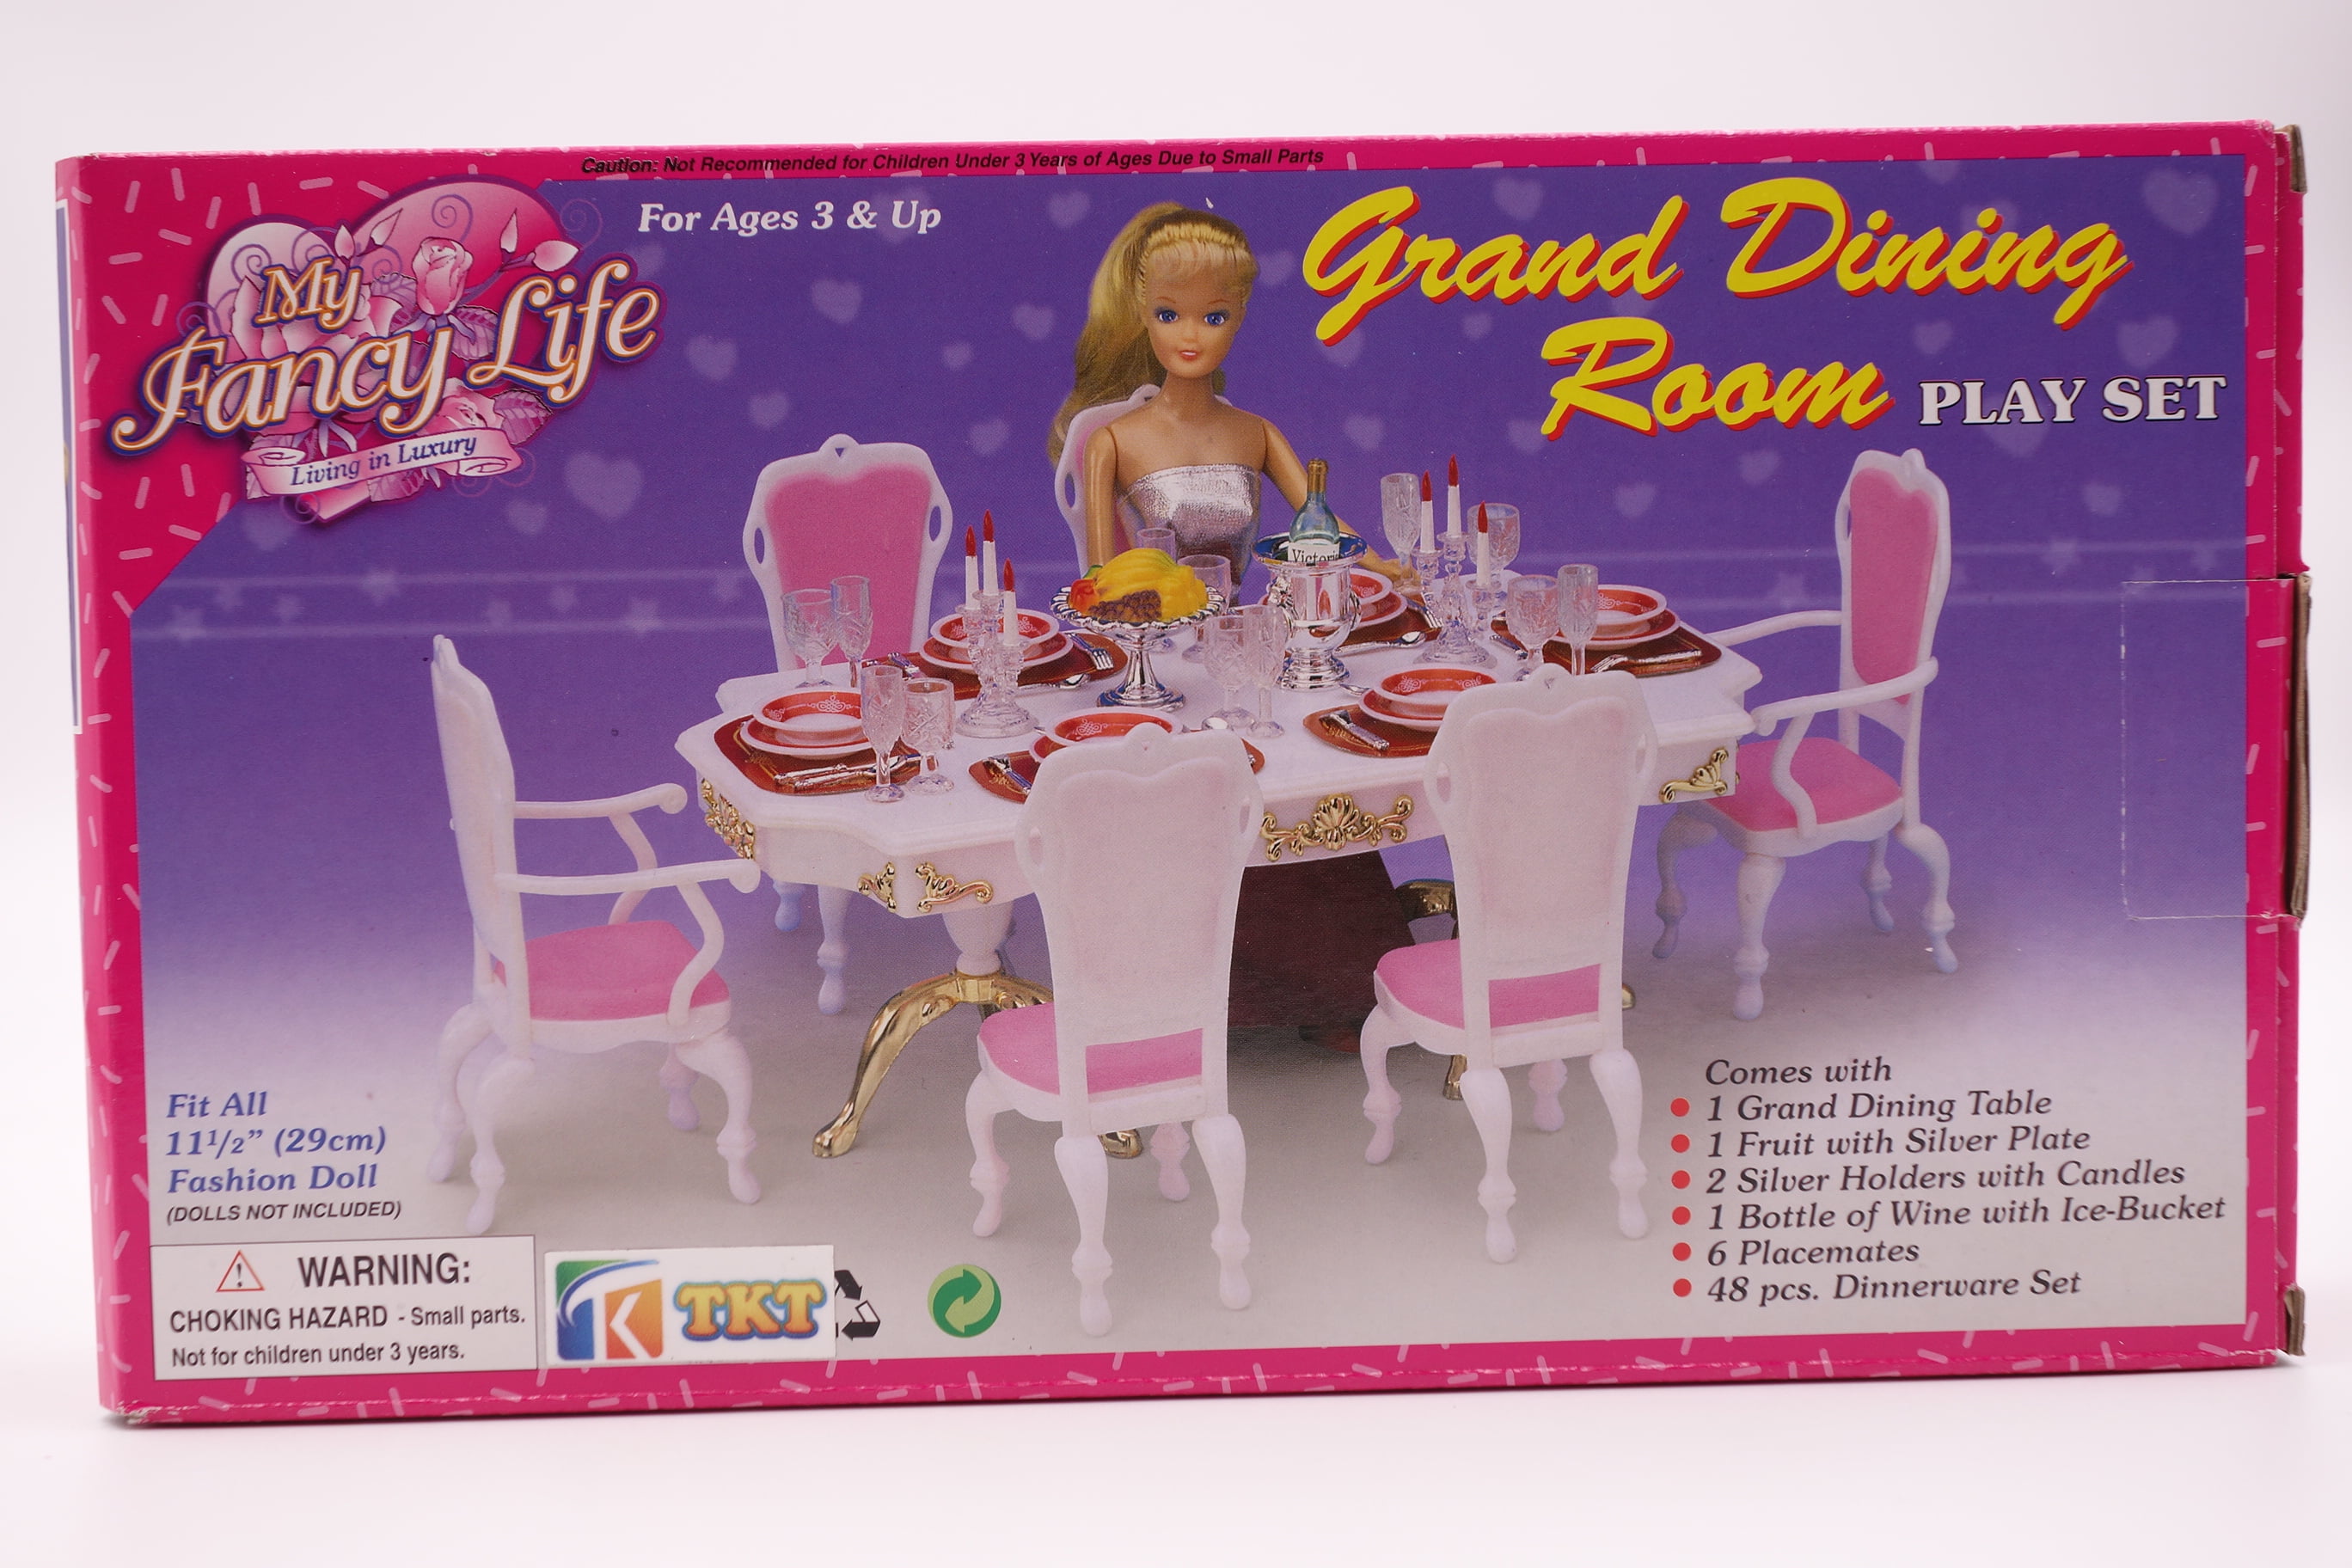 NEW FANCY LIFE DOLL HOUSE FURNITURE GRAND Dining Room Playset 2312 